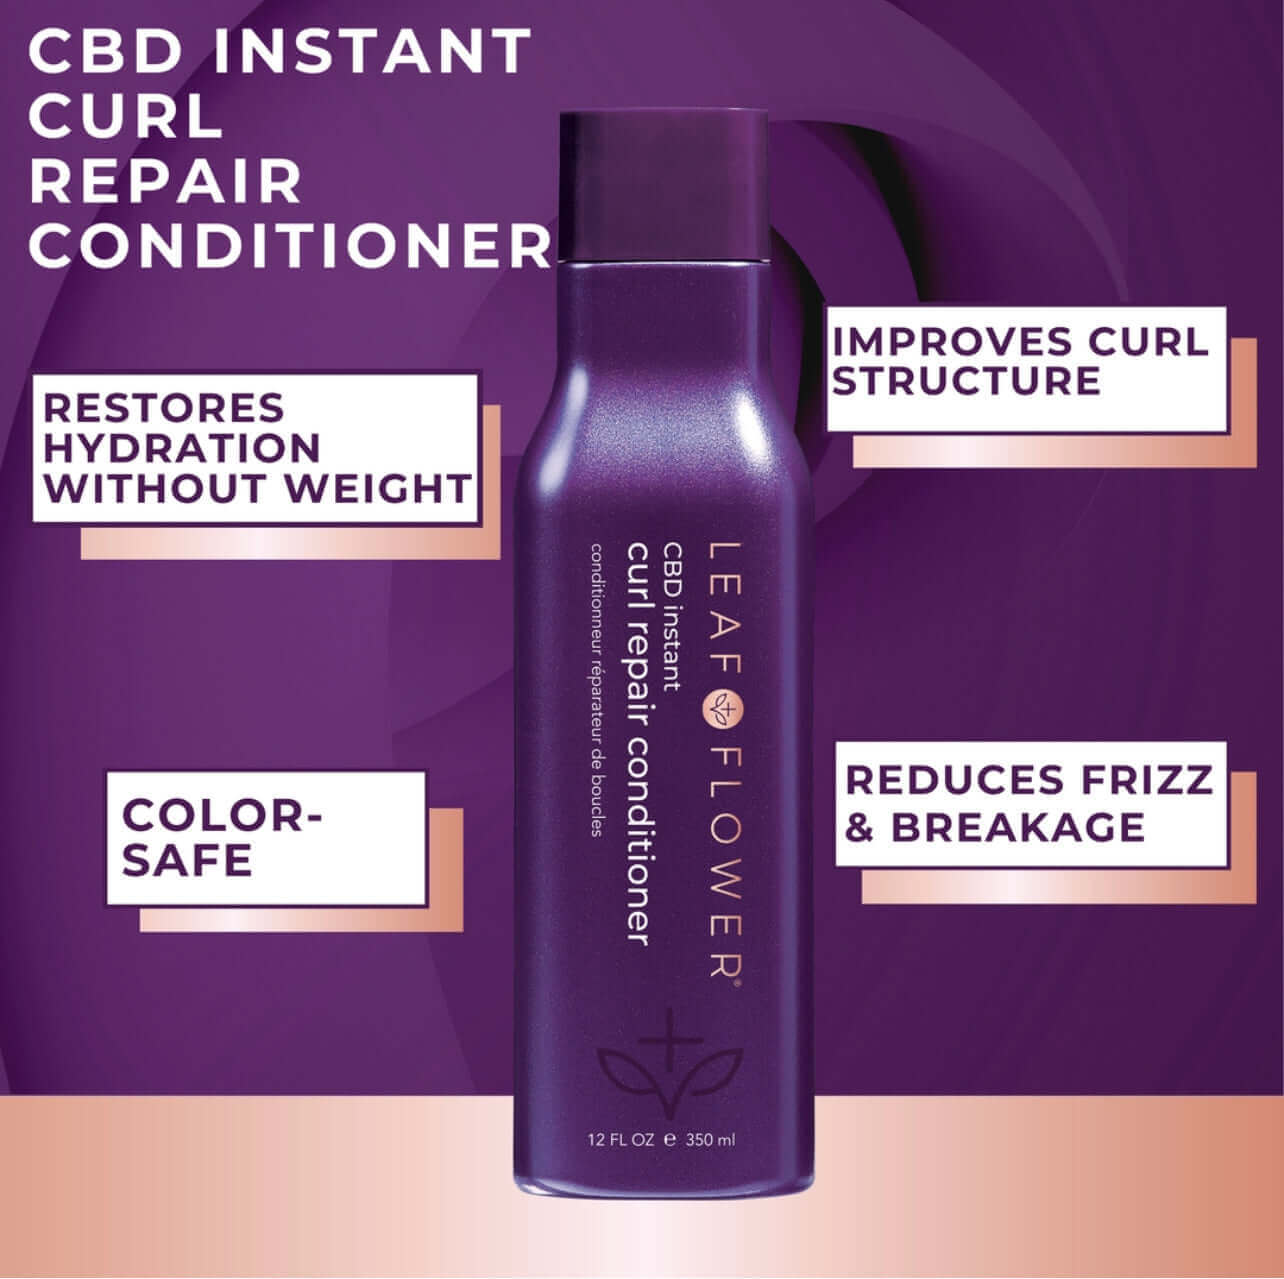 Leaf and Flower Instant Curl Refresh Conditioner, from the brand Leaf and Flower, provides intense hydration for all curl types, resulting in ultra-soft curls.